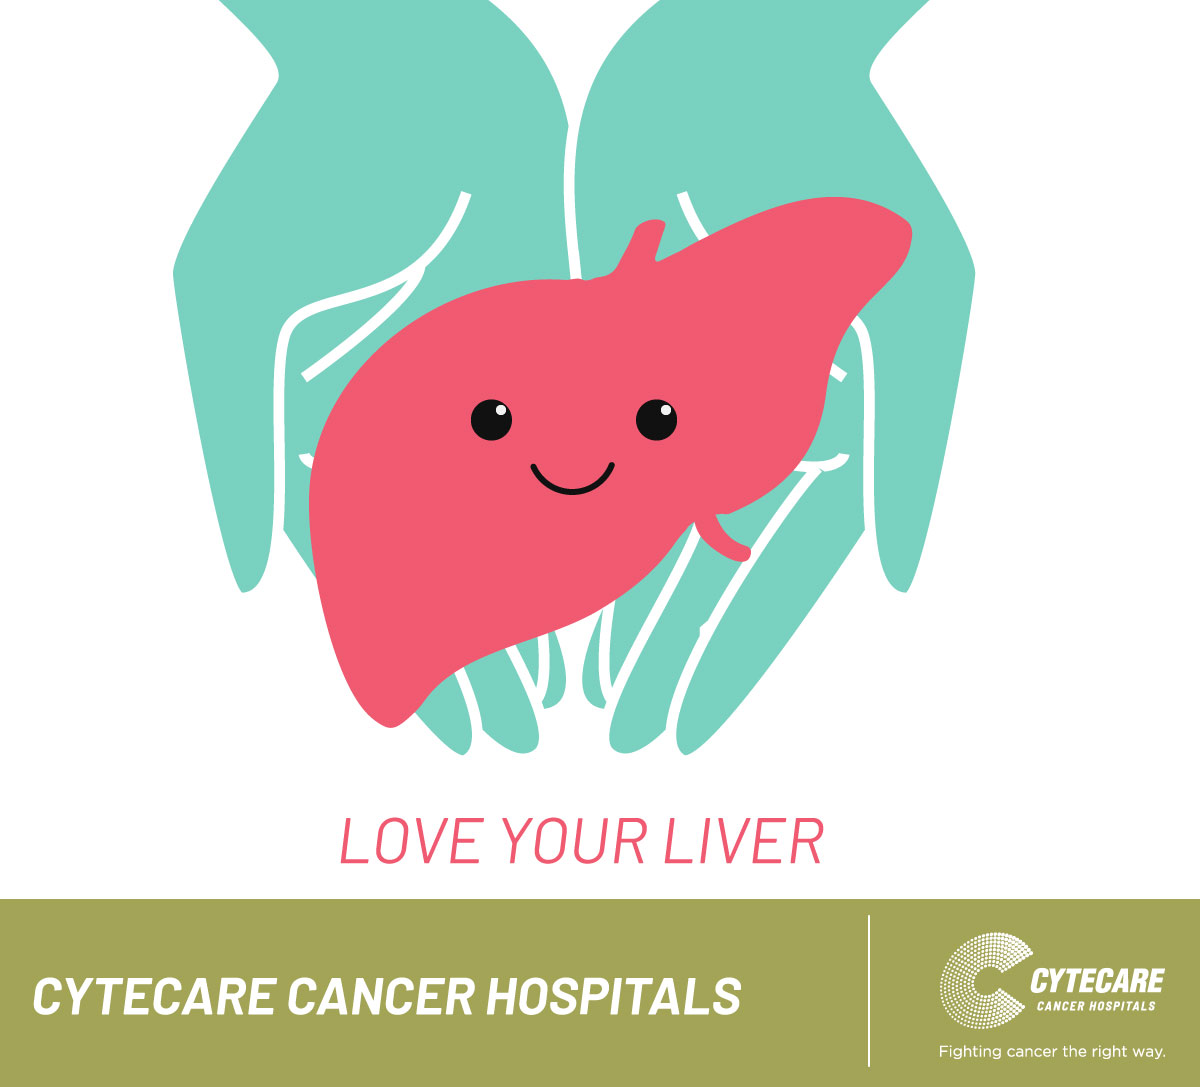 Tips to reduce liver cancer risk